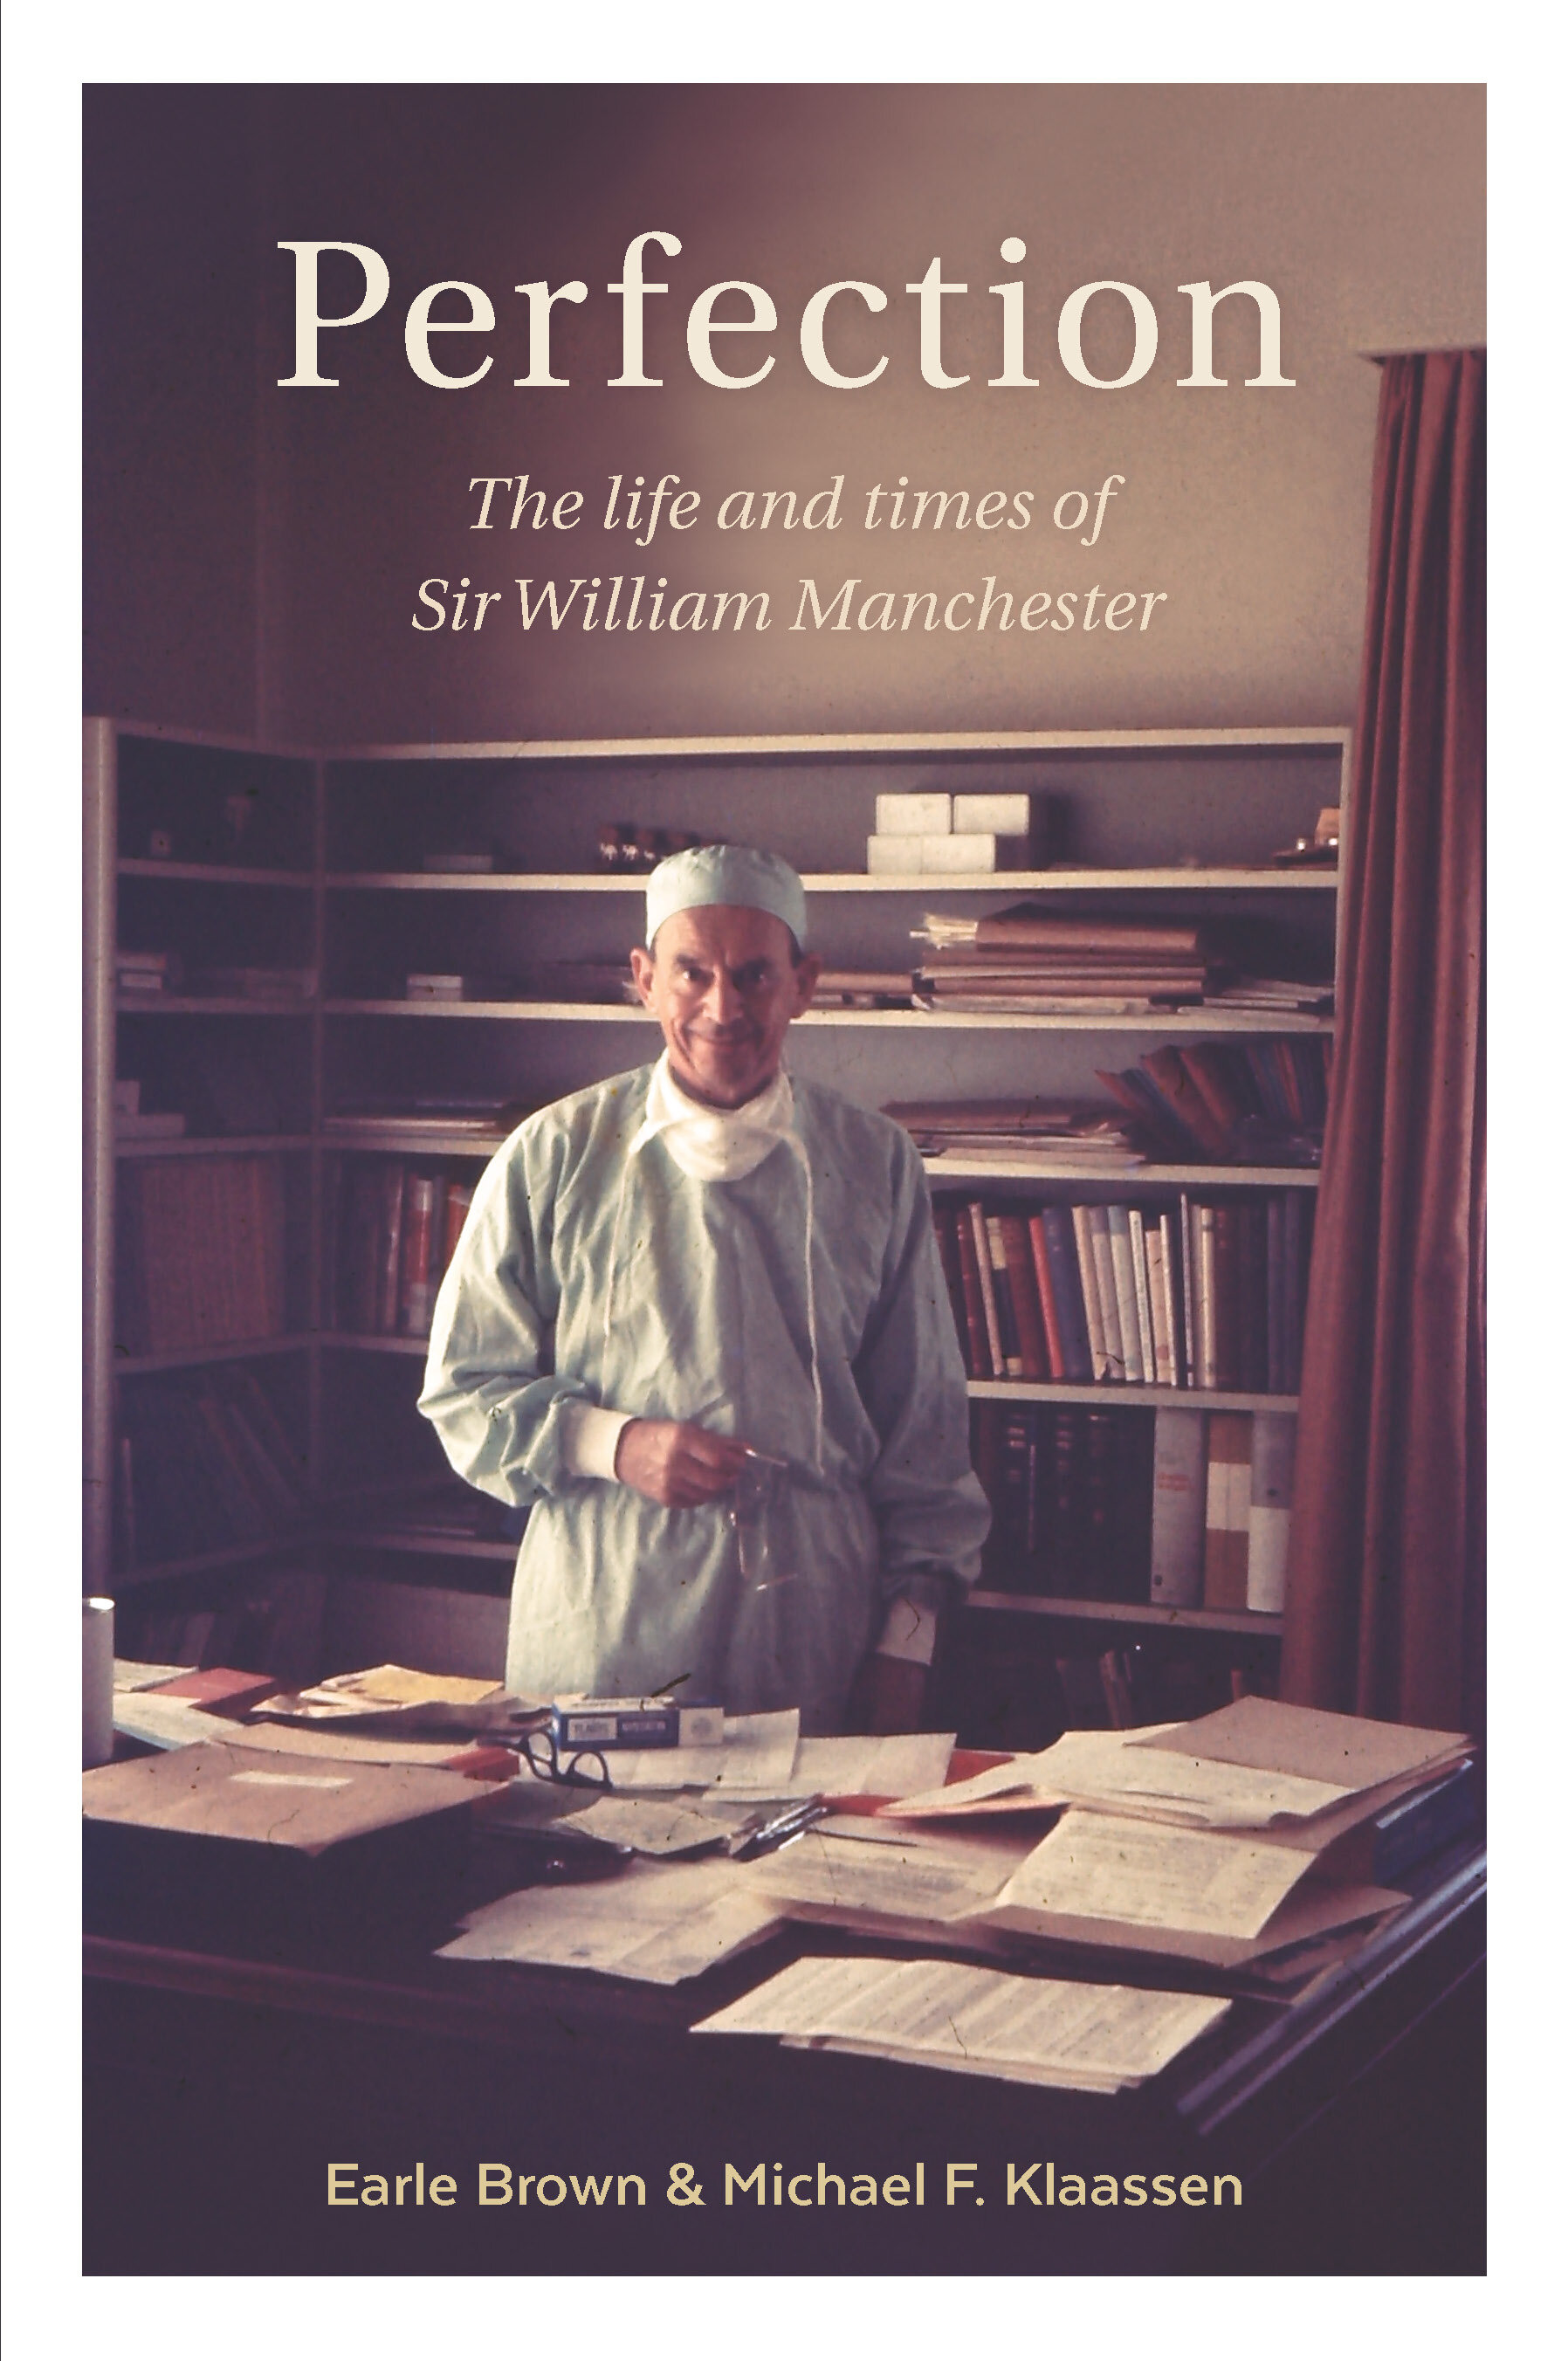  Published by Mary Egan Publishing ISBN 978-0-473-53951-1  From country boy to internationally renowned plastic surgeon, from junior medical officer to Lieutenant Colonel in just four years, perfection: the life and times of Sir William Manchester co